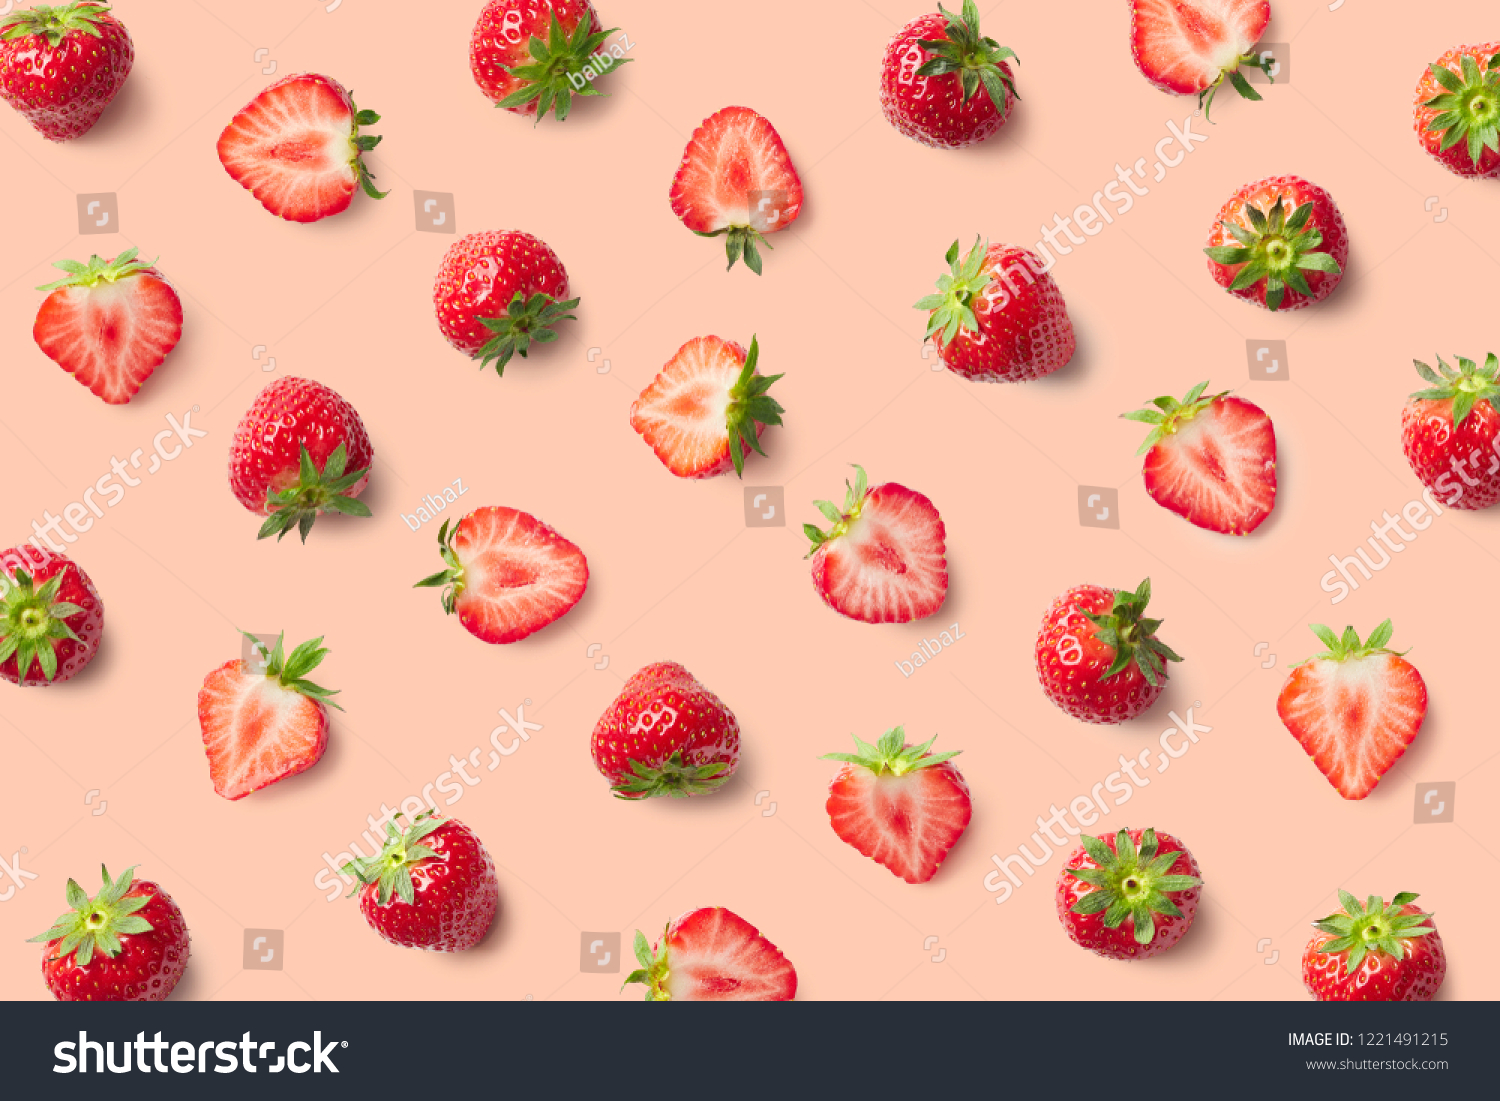 Colorful pattern of strawberries on pink background. Top view #1221491215